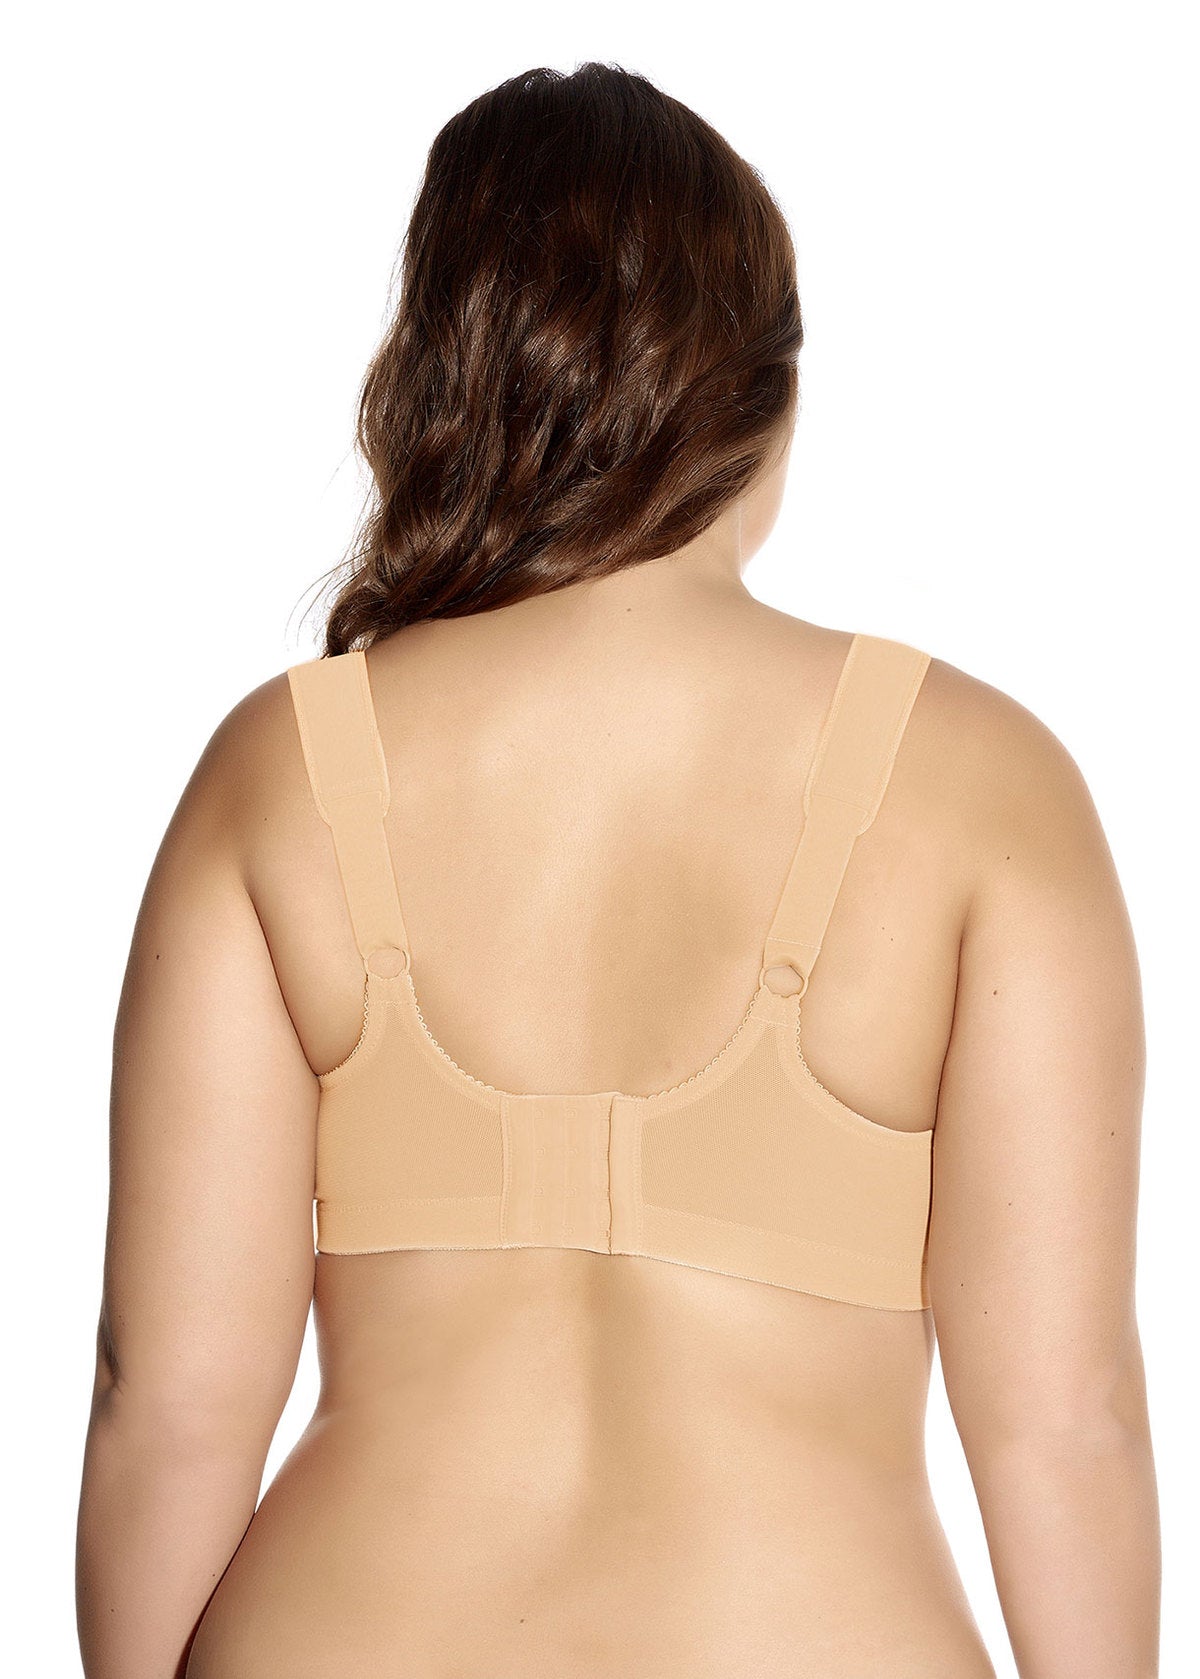 GODDESS AUDREY SOFT CUP NONWIRE BRA - NUDE